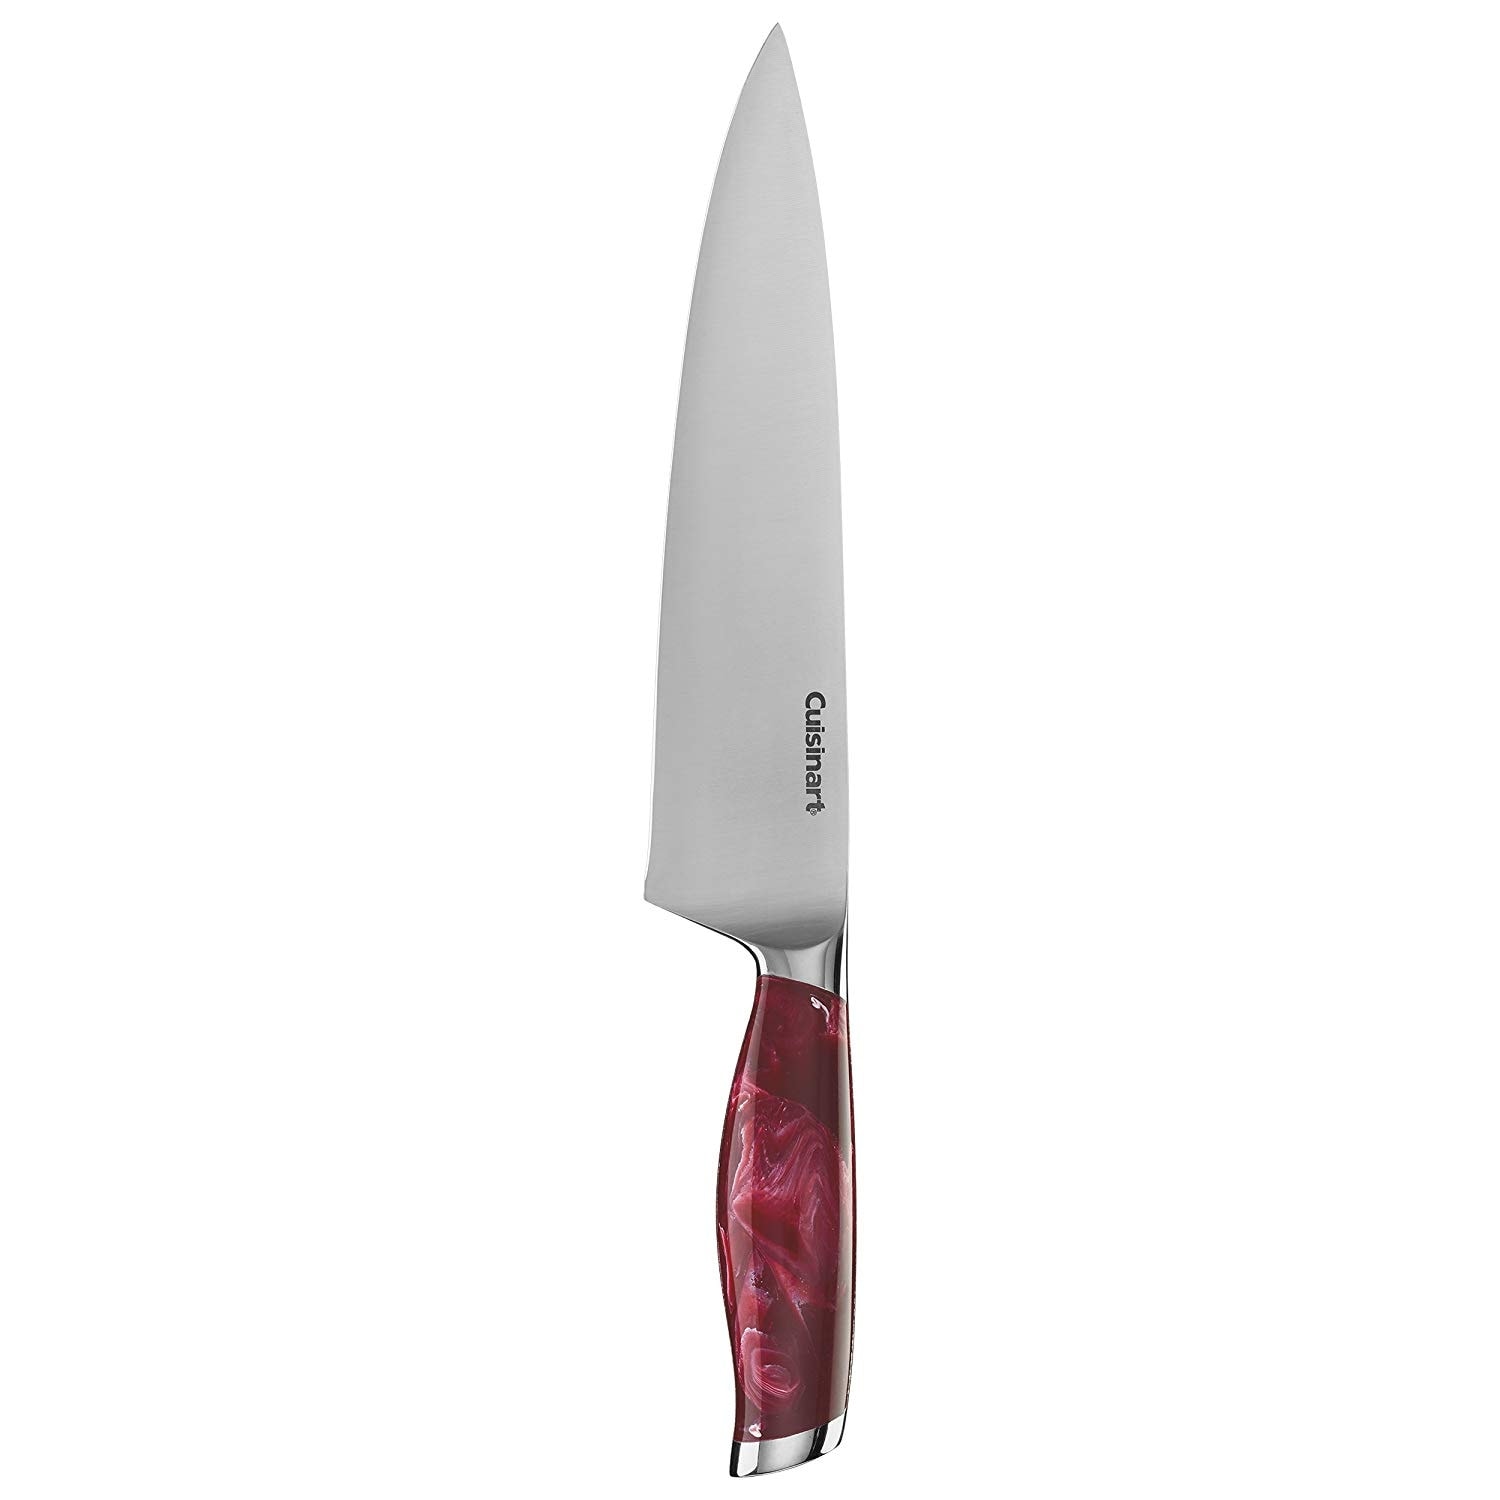 Cuisinart Graphix Collection 8 Bread Knife